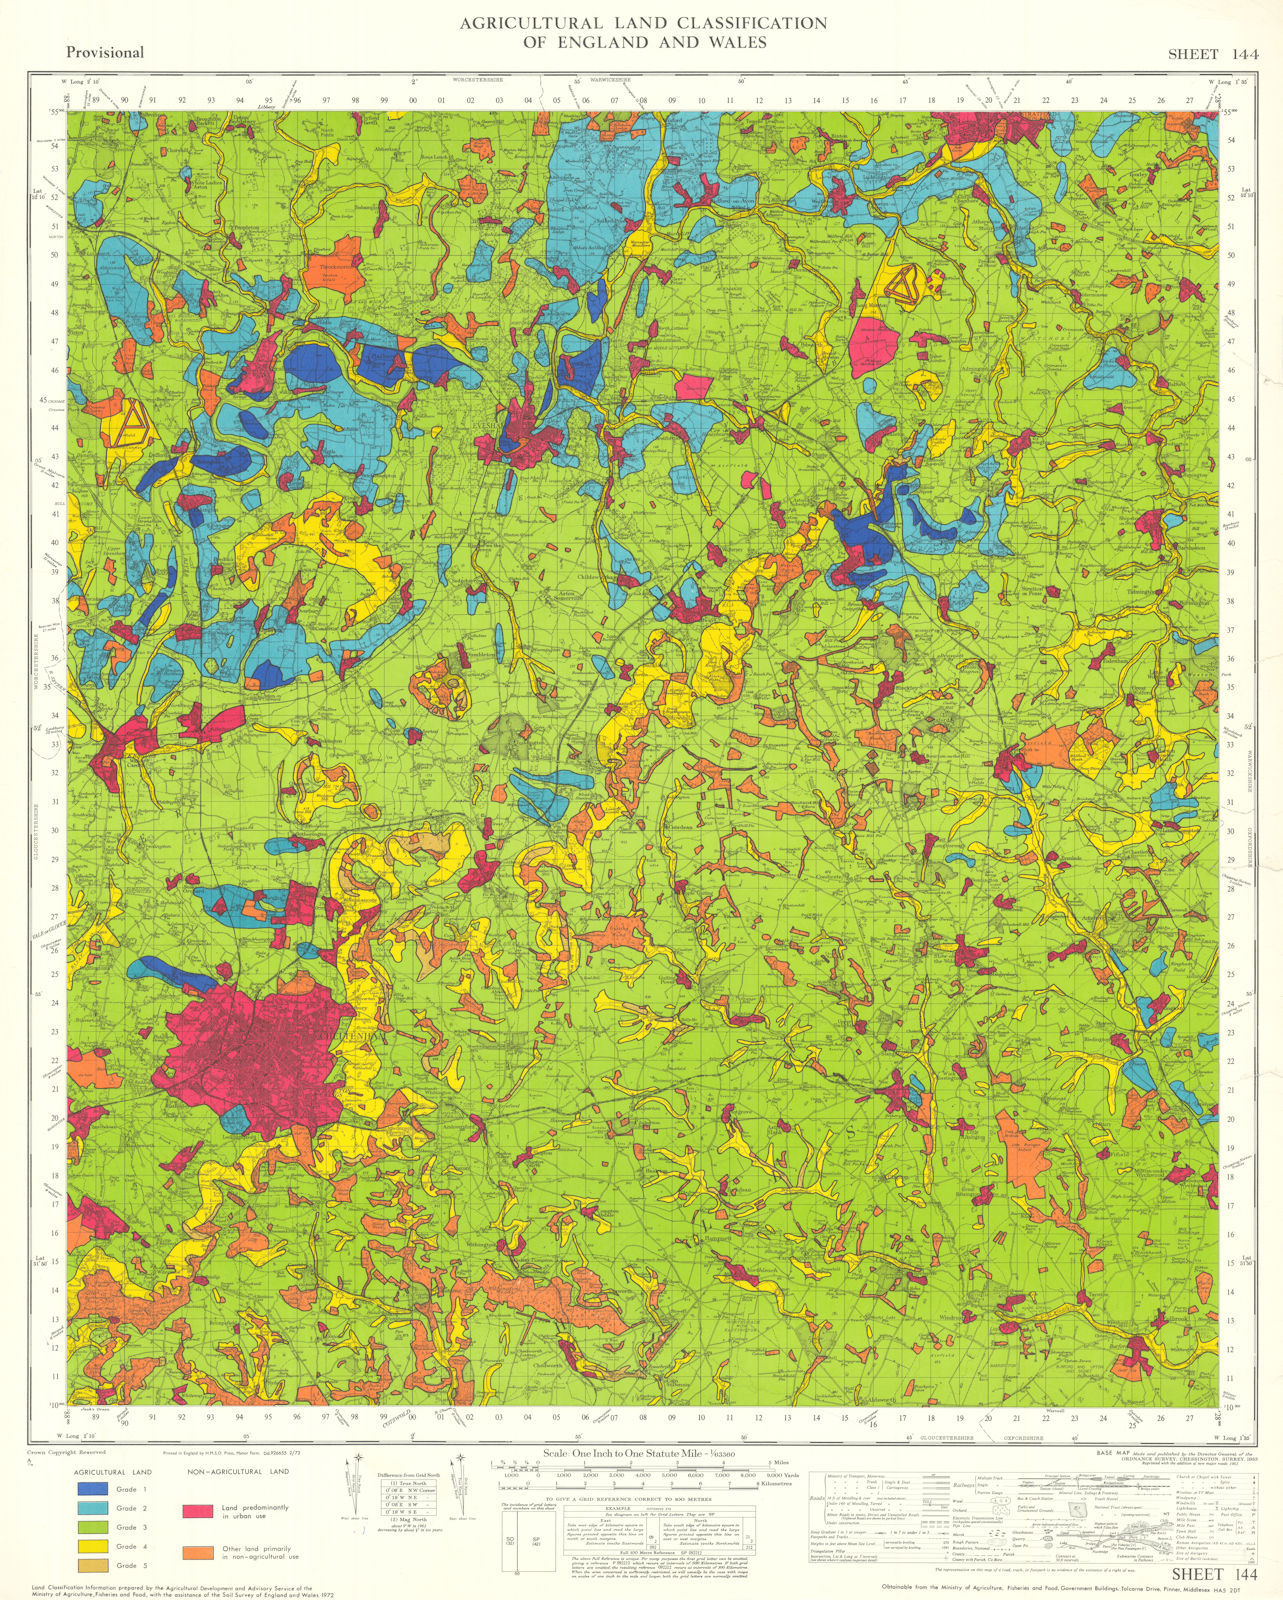 Associate Product Agricultural Land Classification 144 Cotswolds. Severn & Avon Vales 1972 map